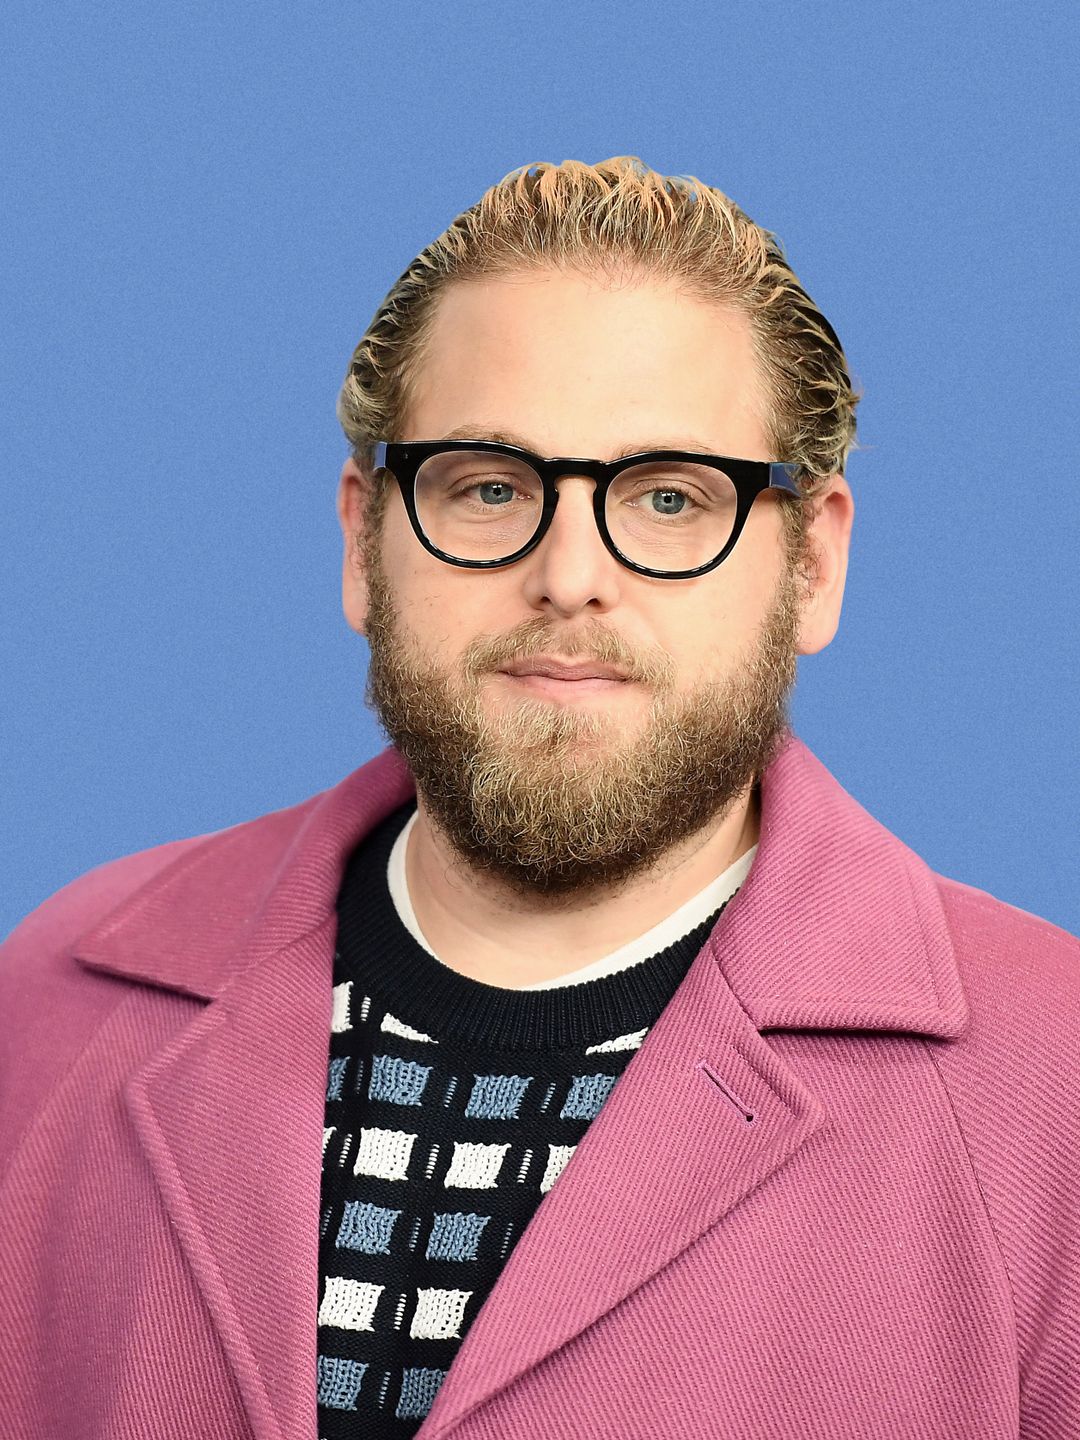 Jonah Hill current look